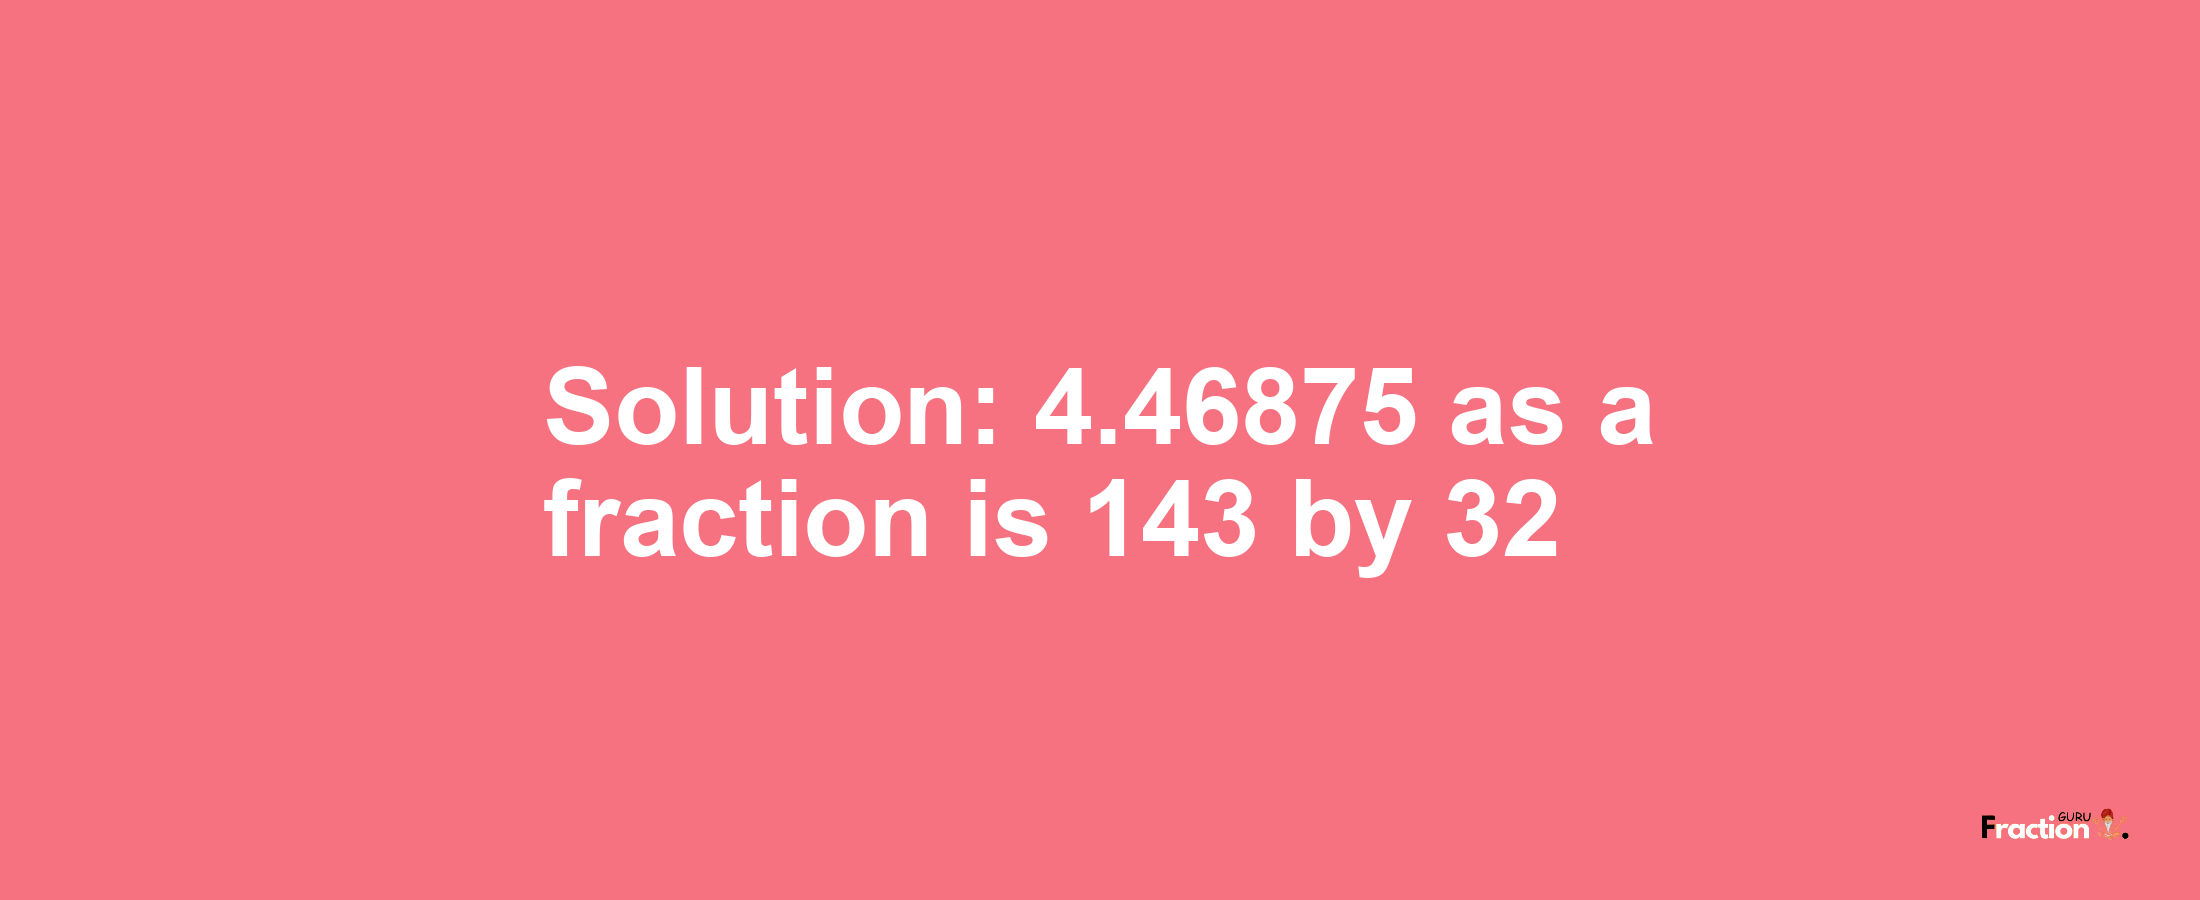 Solution:4.46875 as a fraction is 143/32